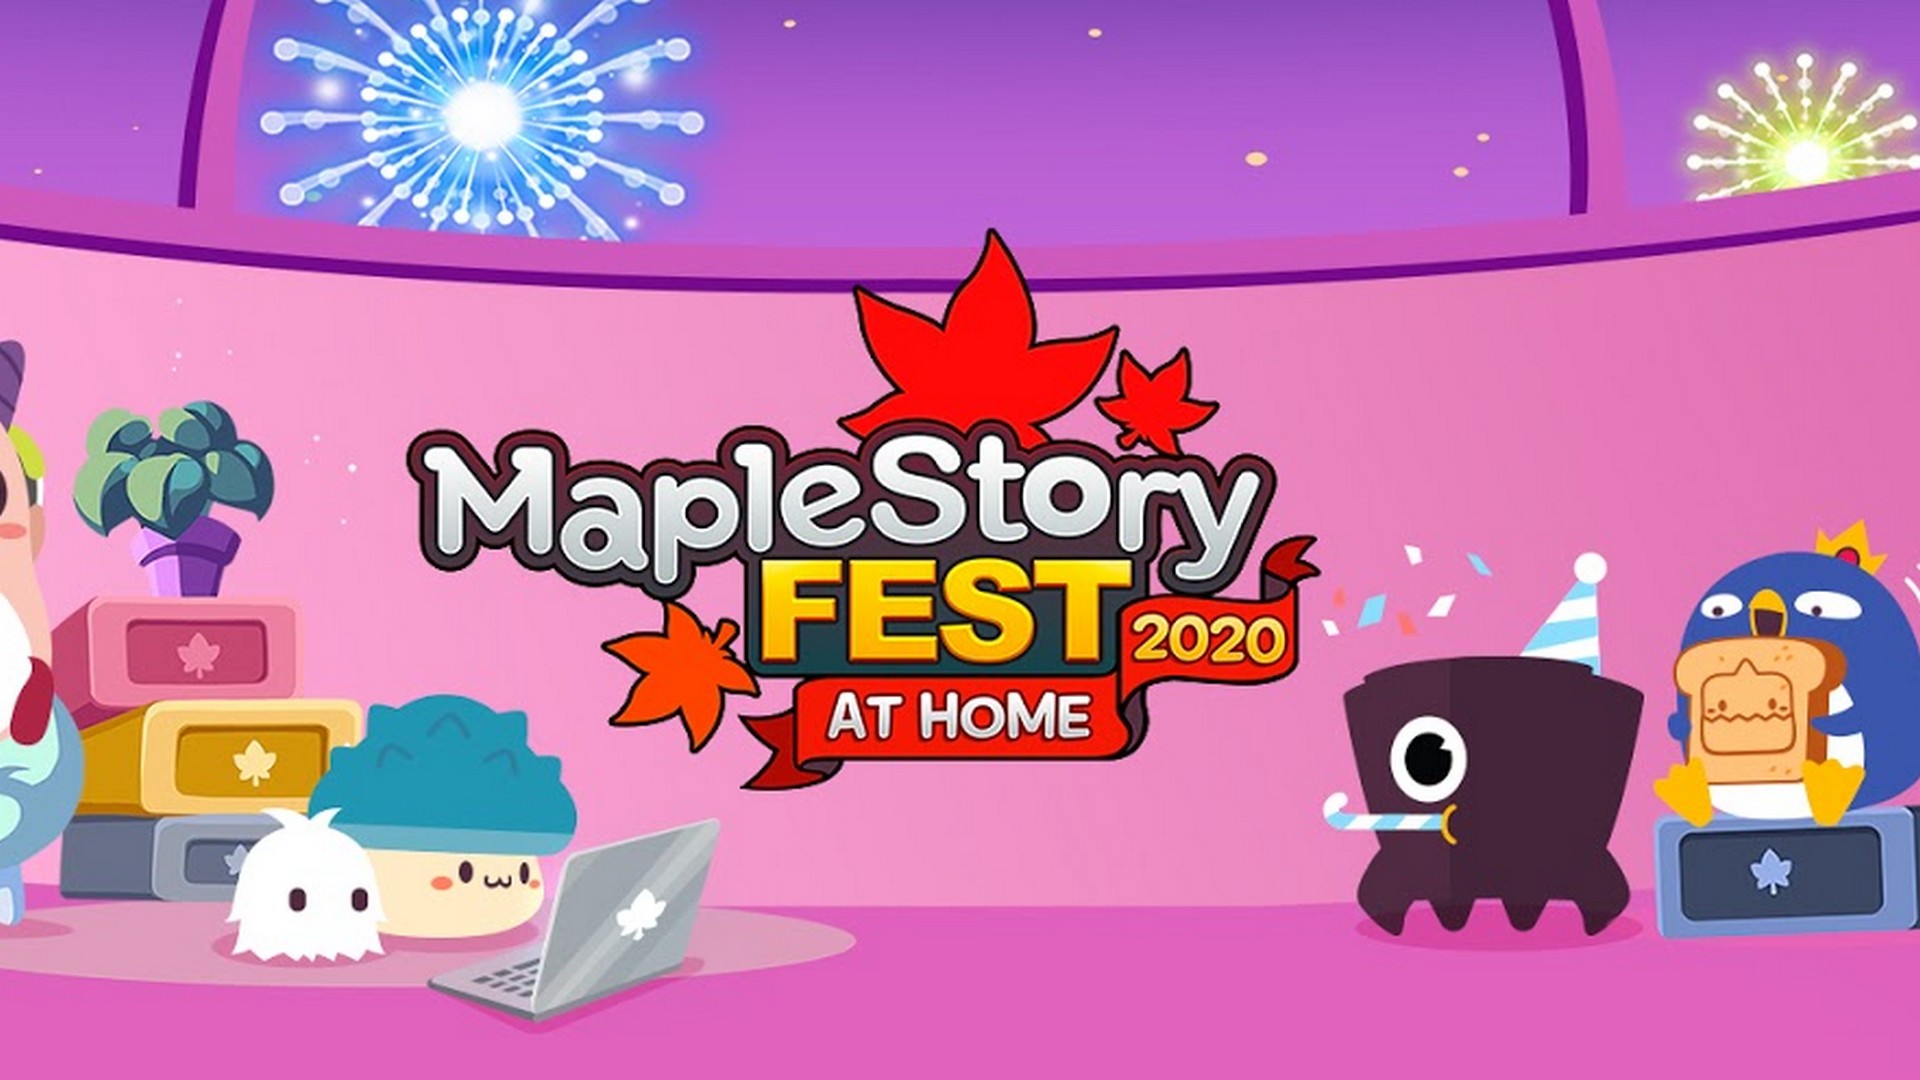 MapleStory Fest At Home 2020 Unites Maplers Around The World With All-Digital Event